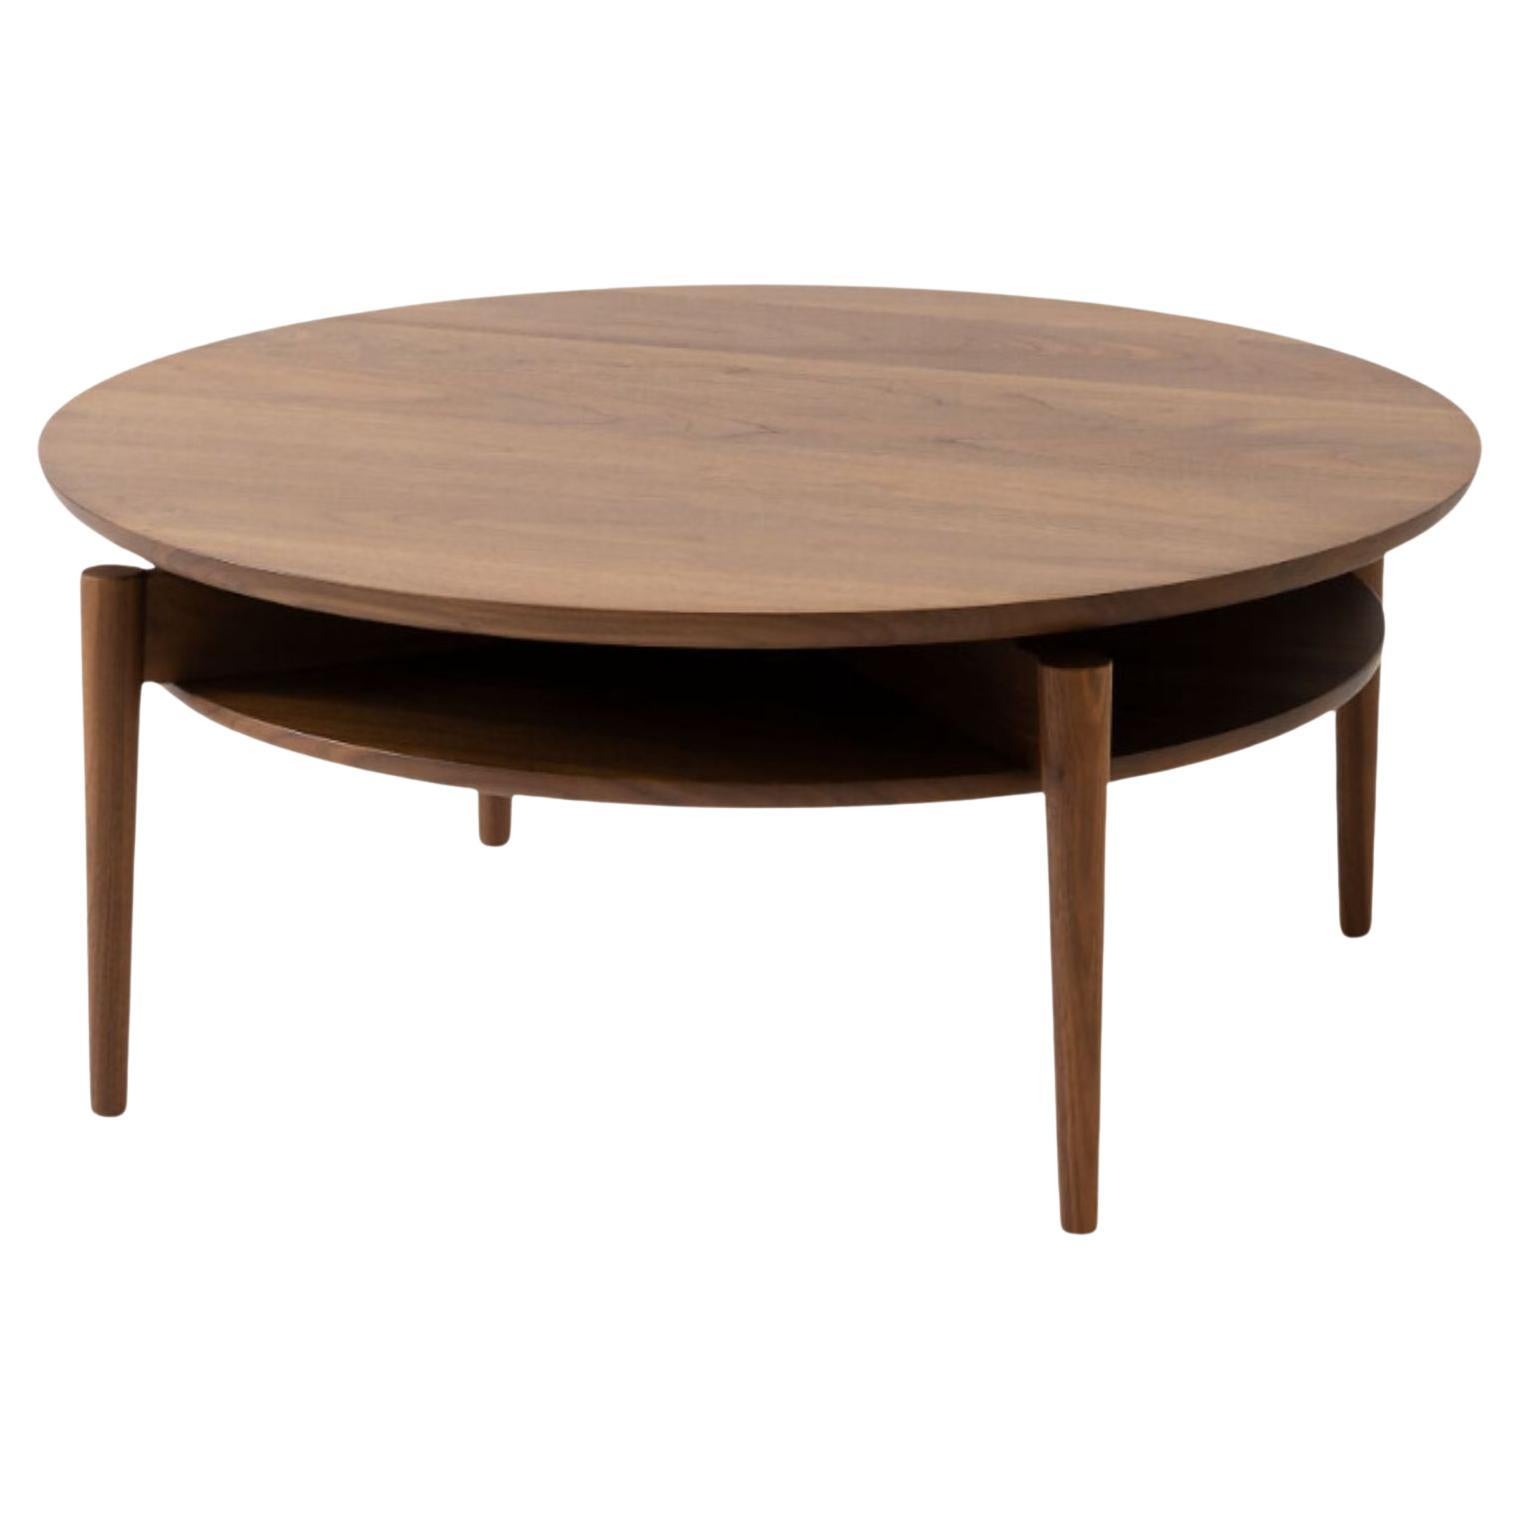 'Ongo' Coffee Table in Walnut and With Shelf for Hida For Sale